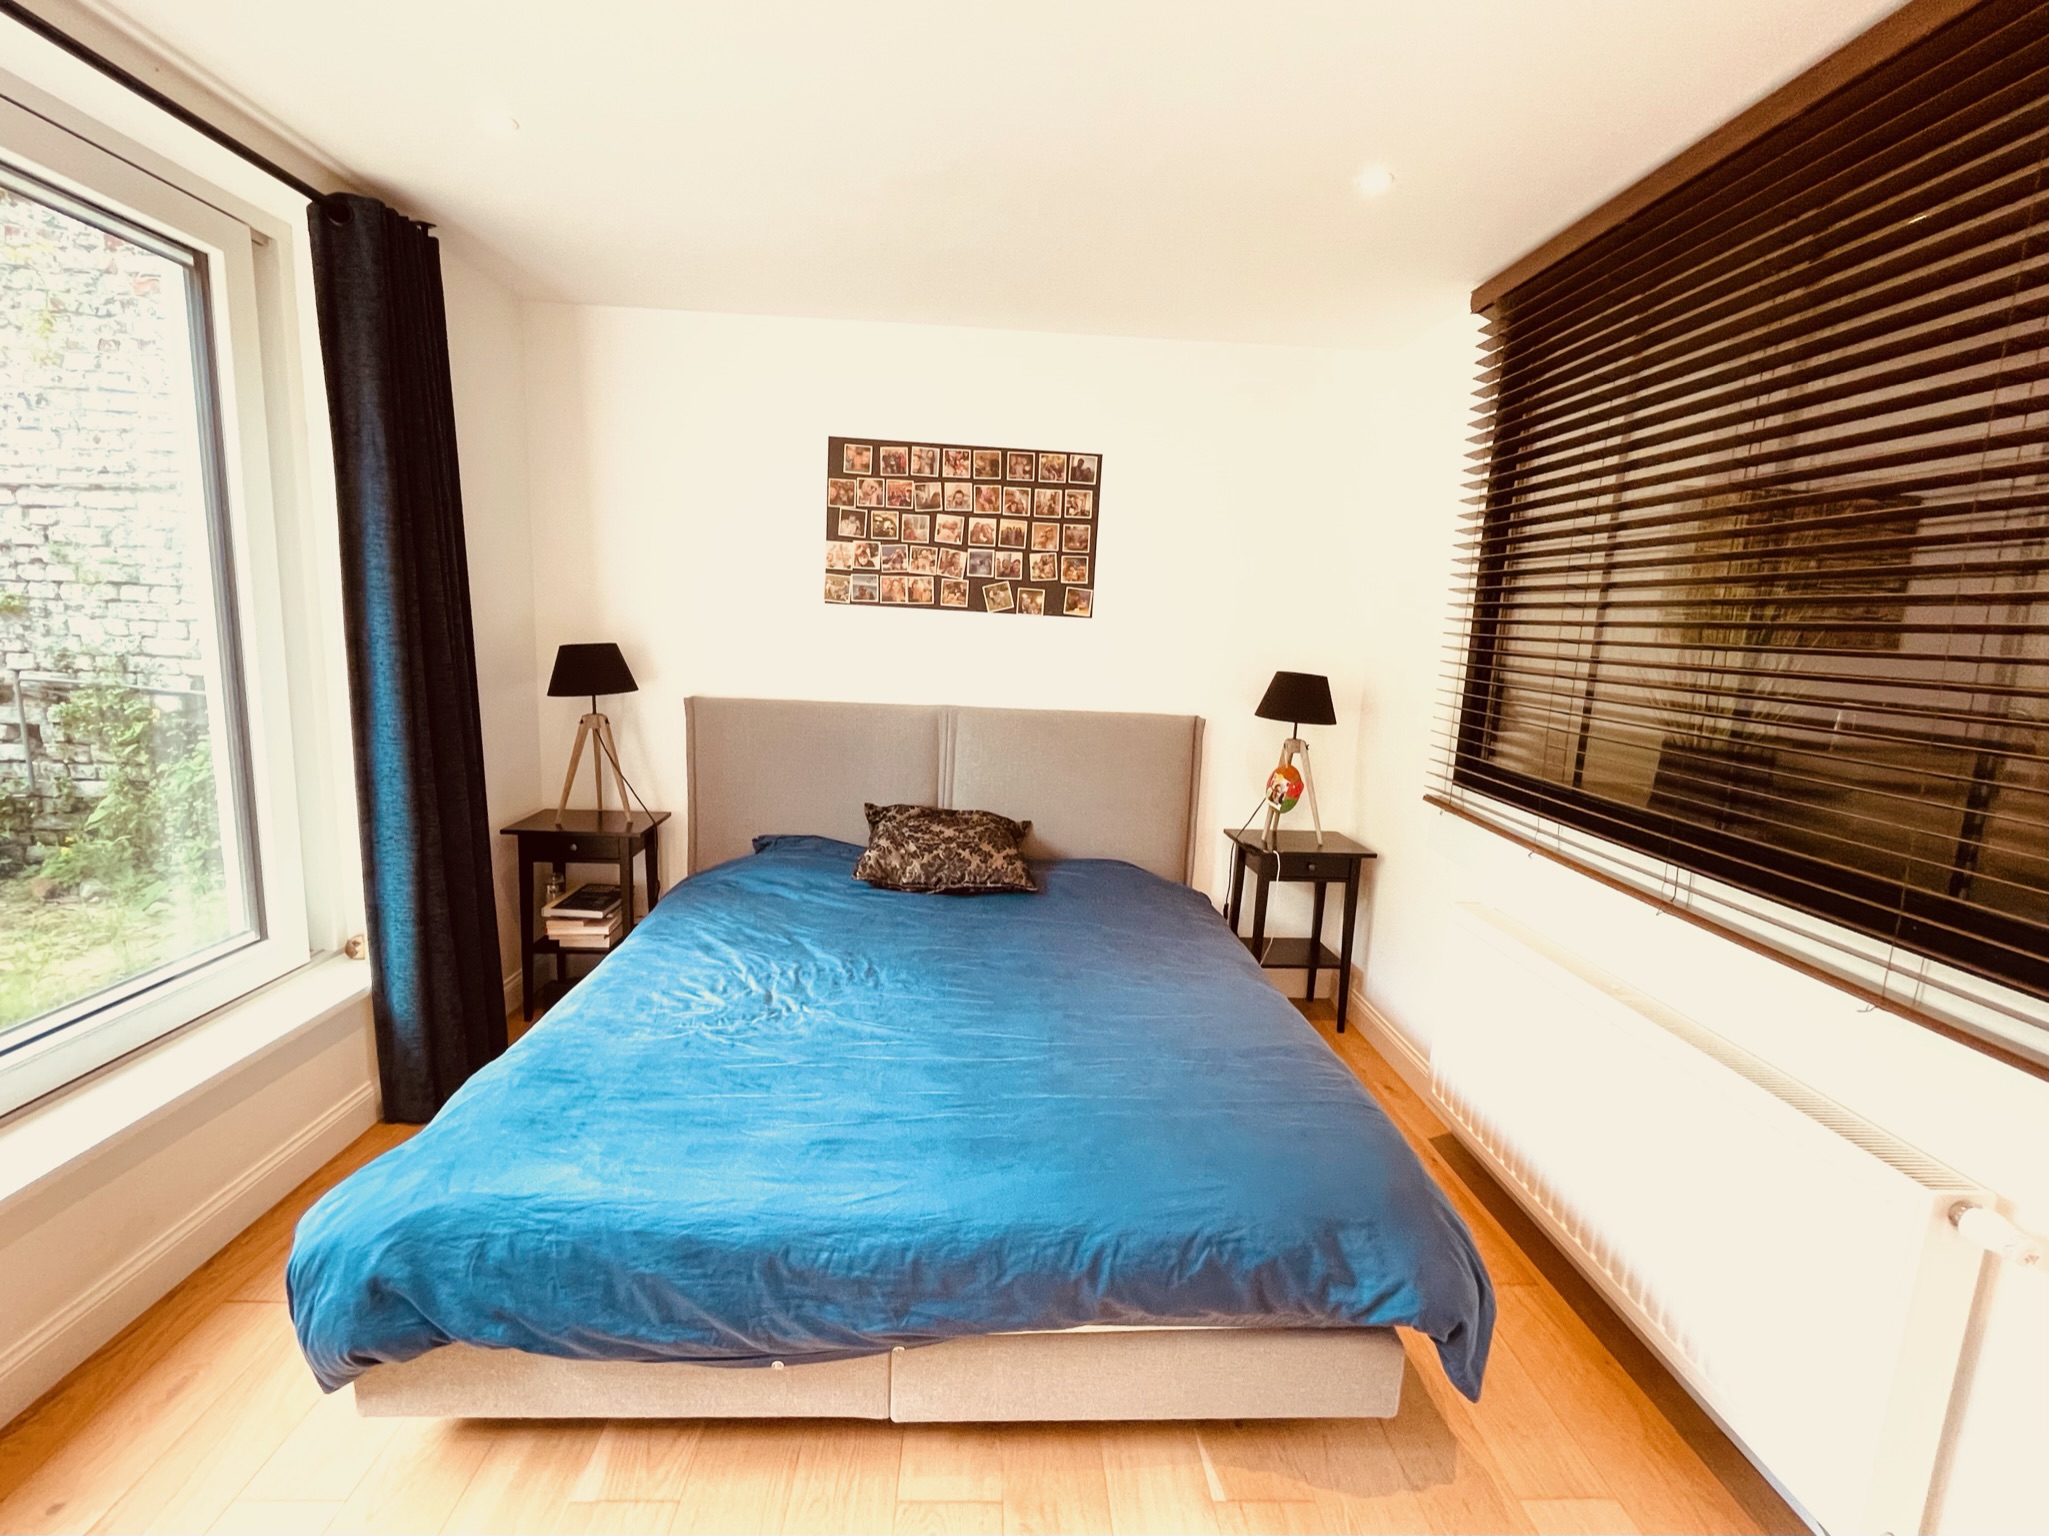 apartment for rent near brussels - bedroom